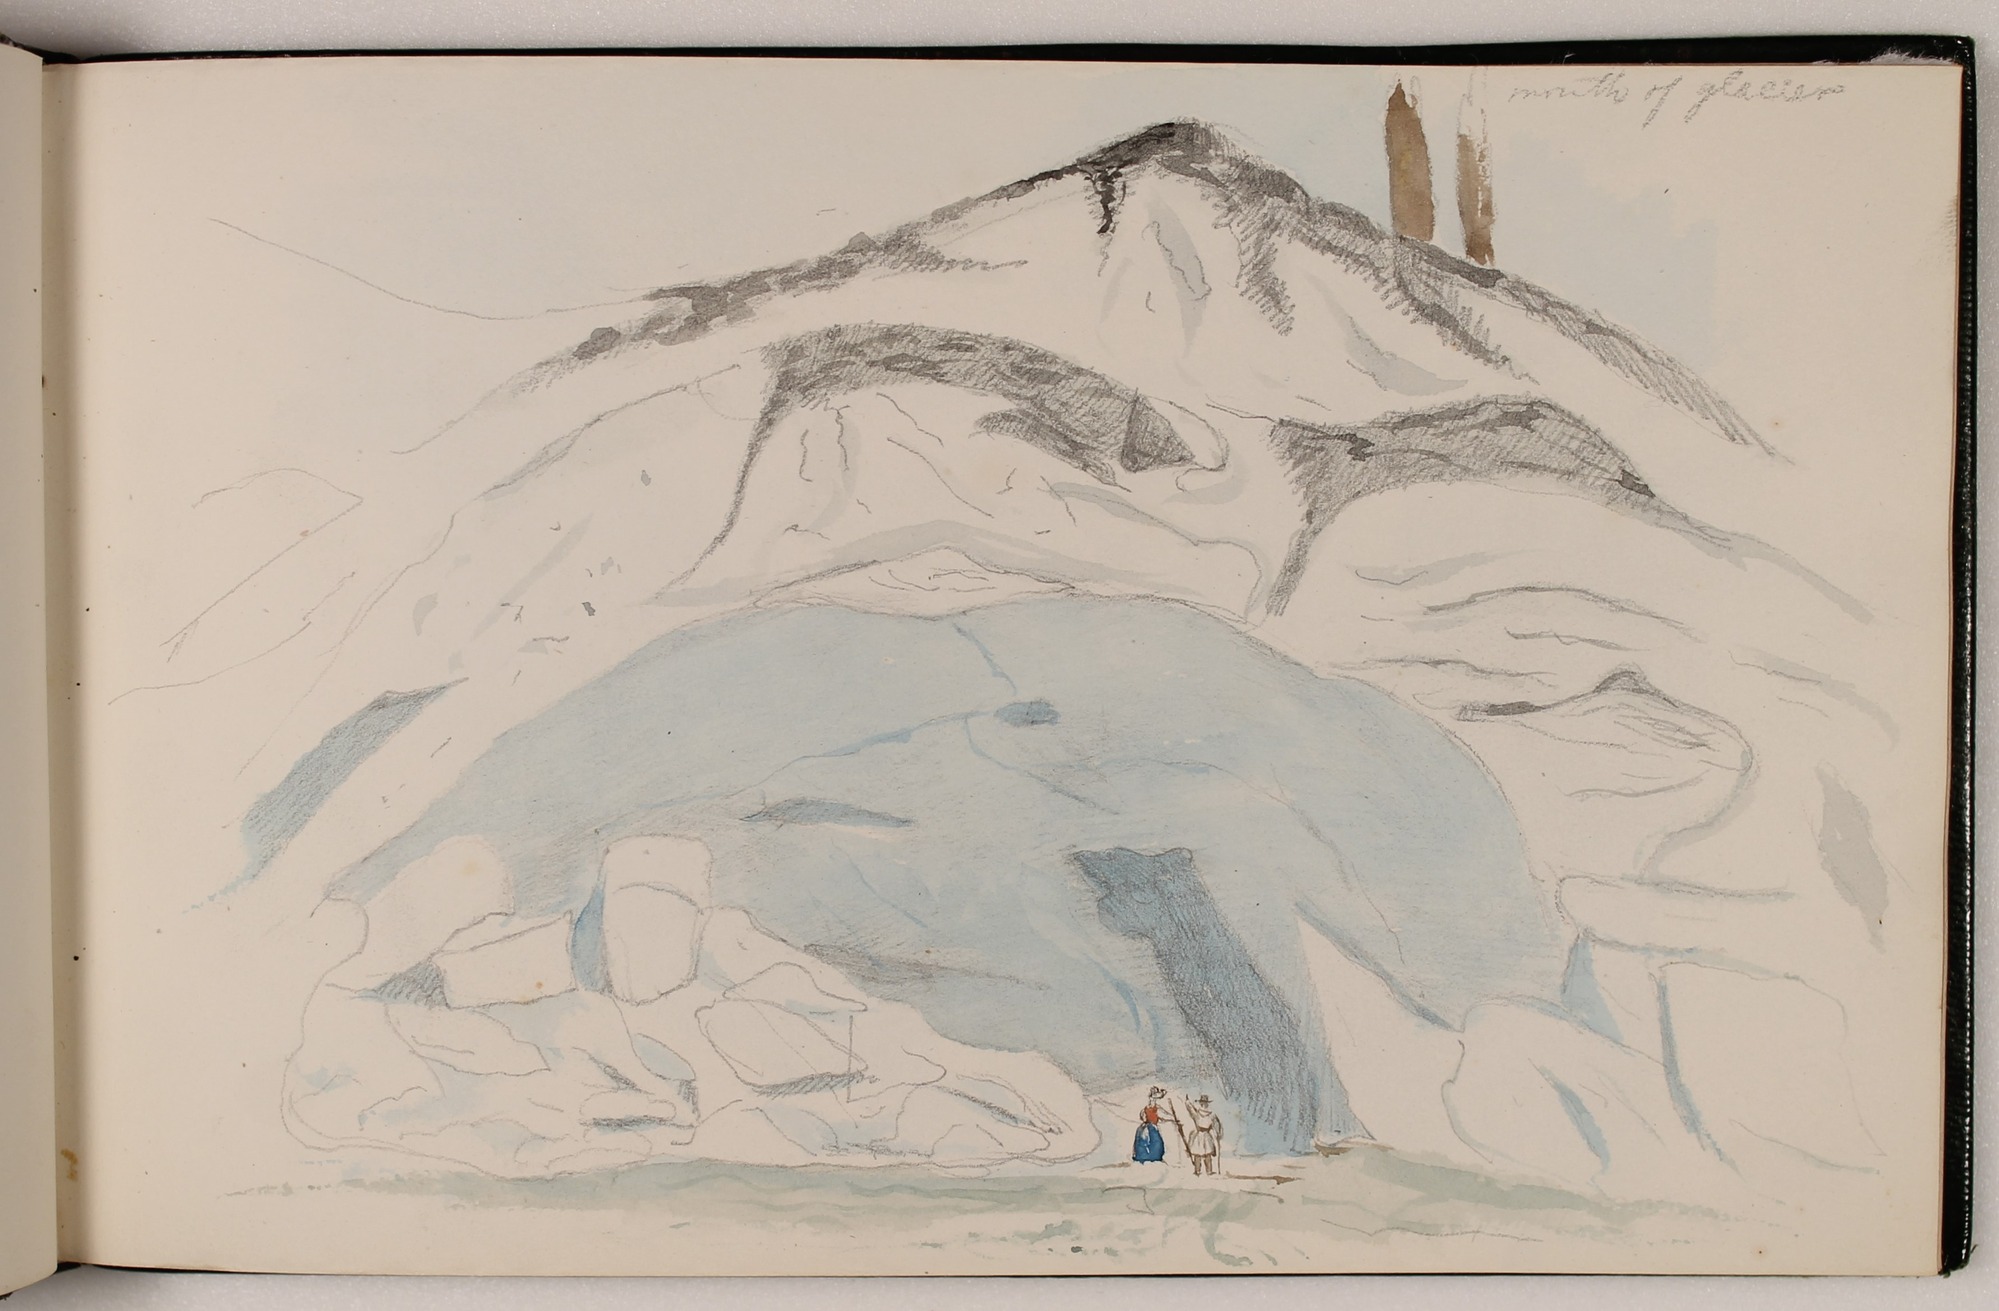 Pencil and watercolor sketch of glacier, white with blue highlights. Two small figures stand in front of glacier.